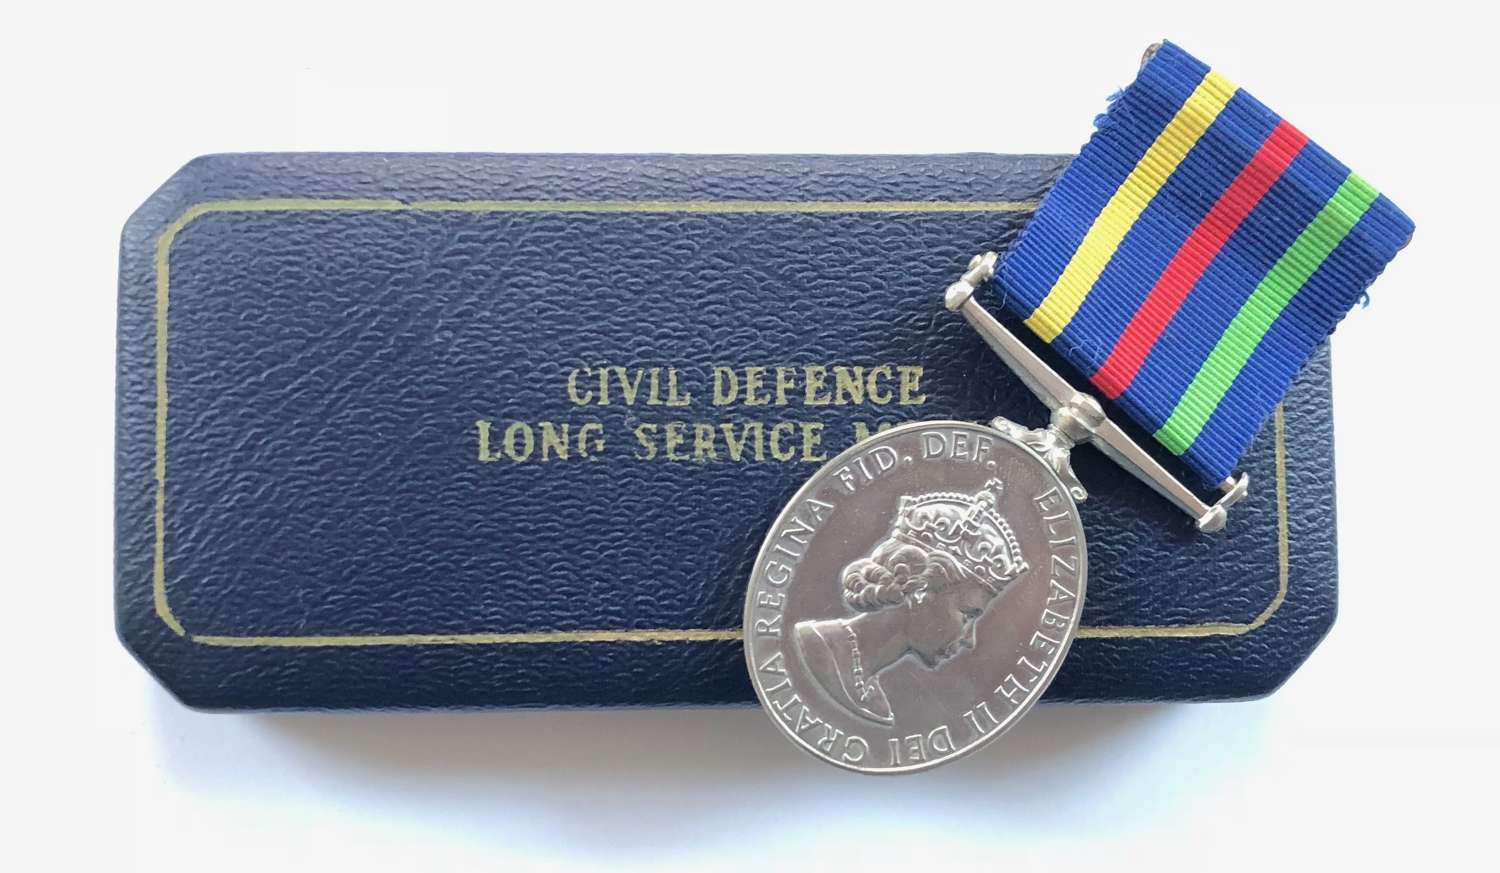 Civil Defence Long Service Medal and Case.